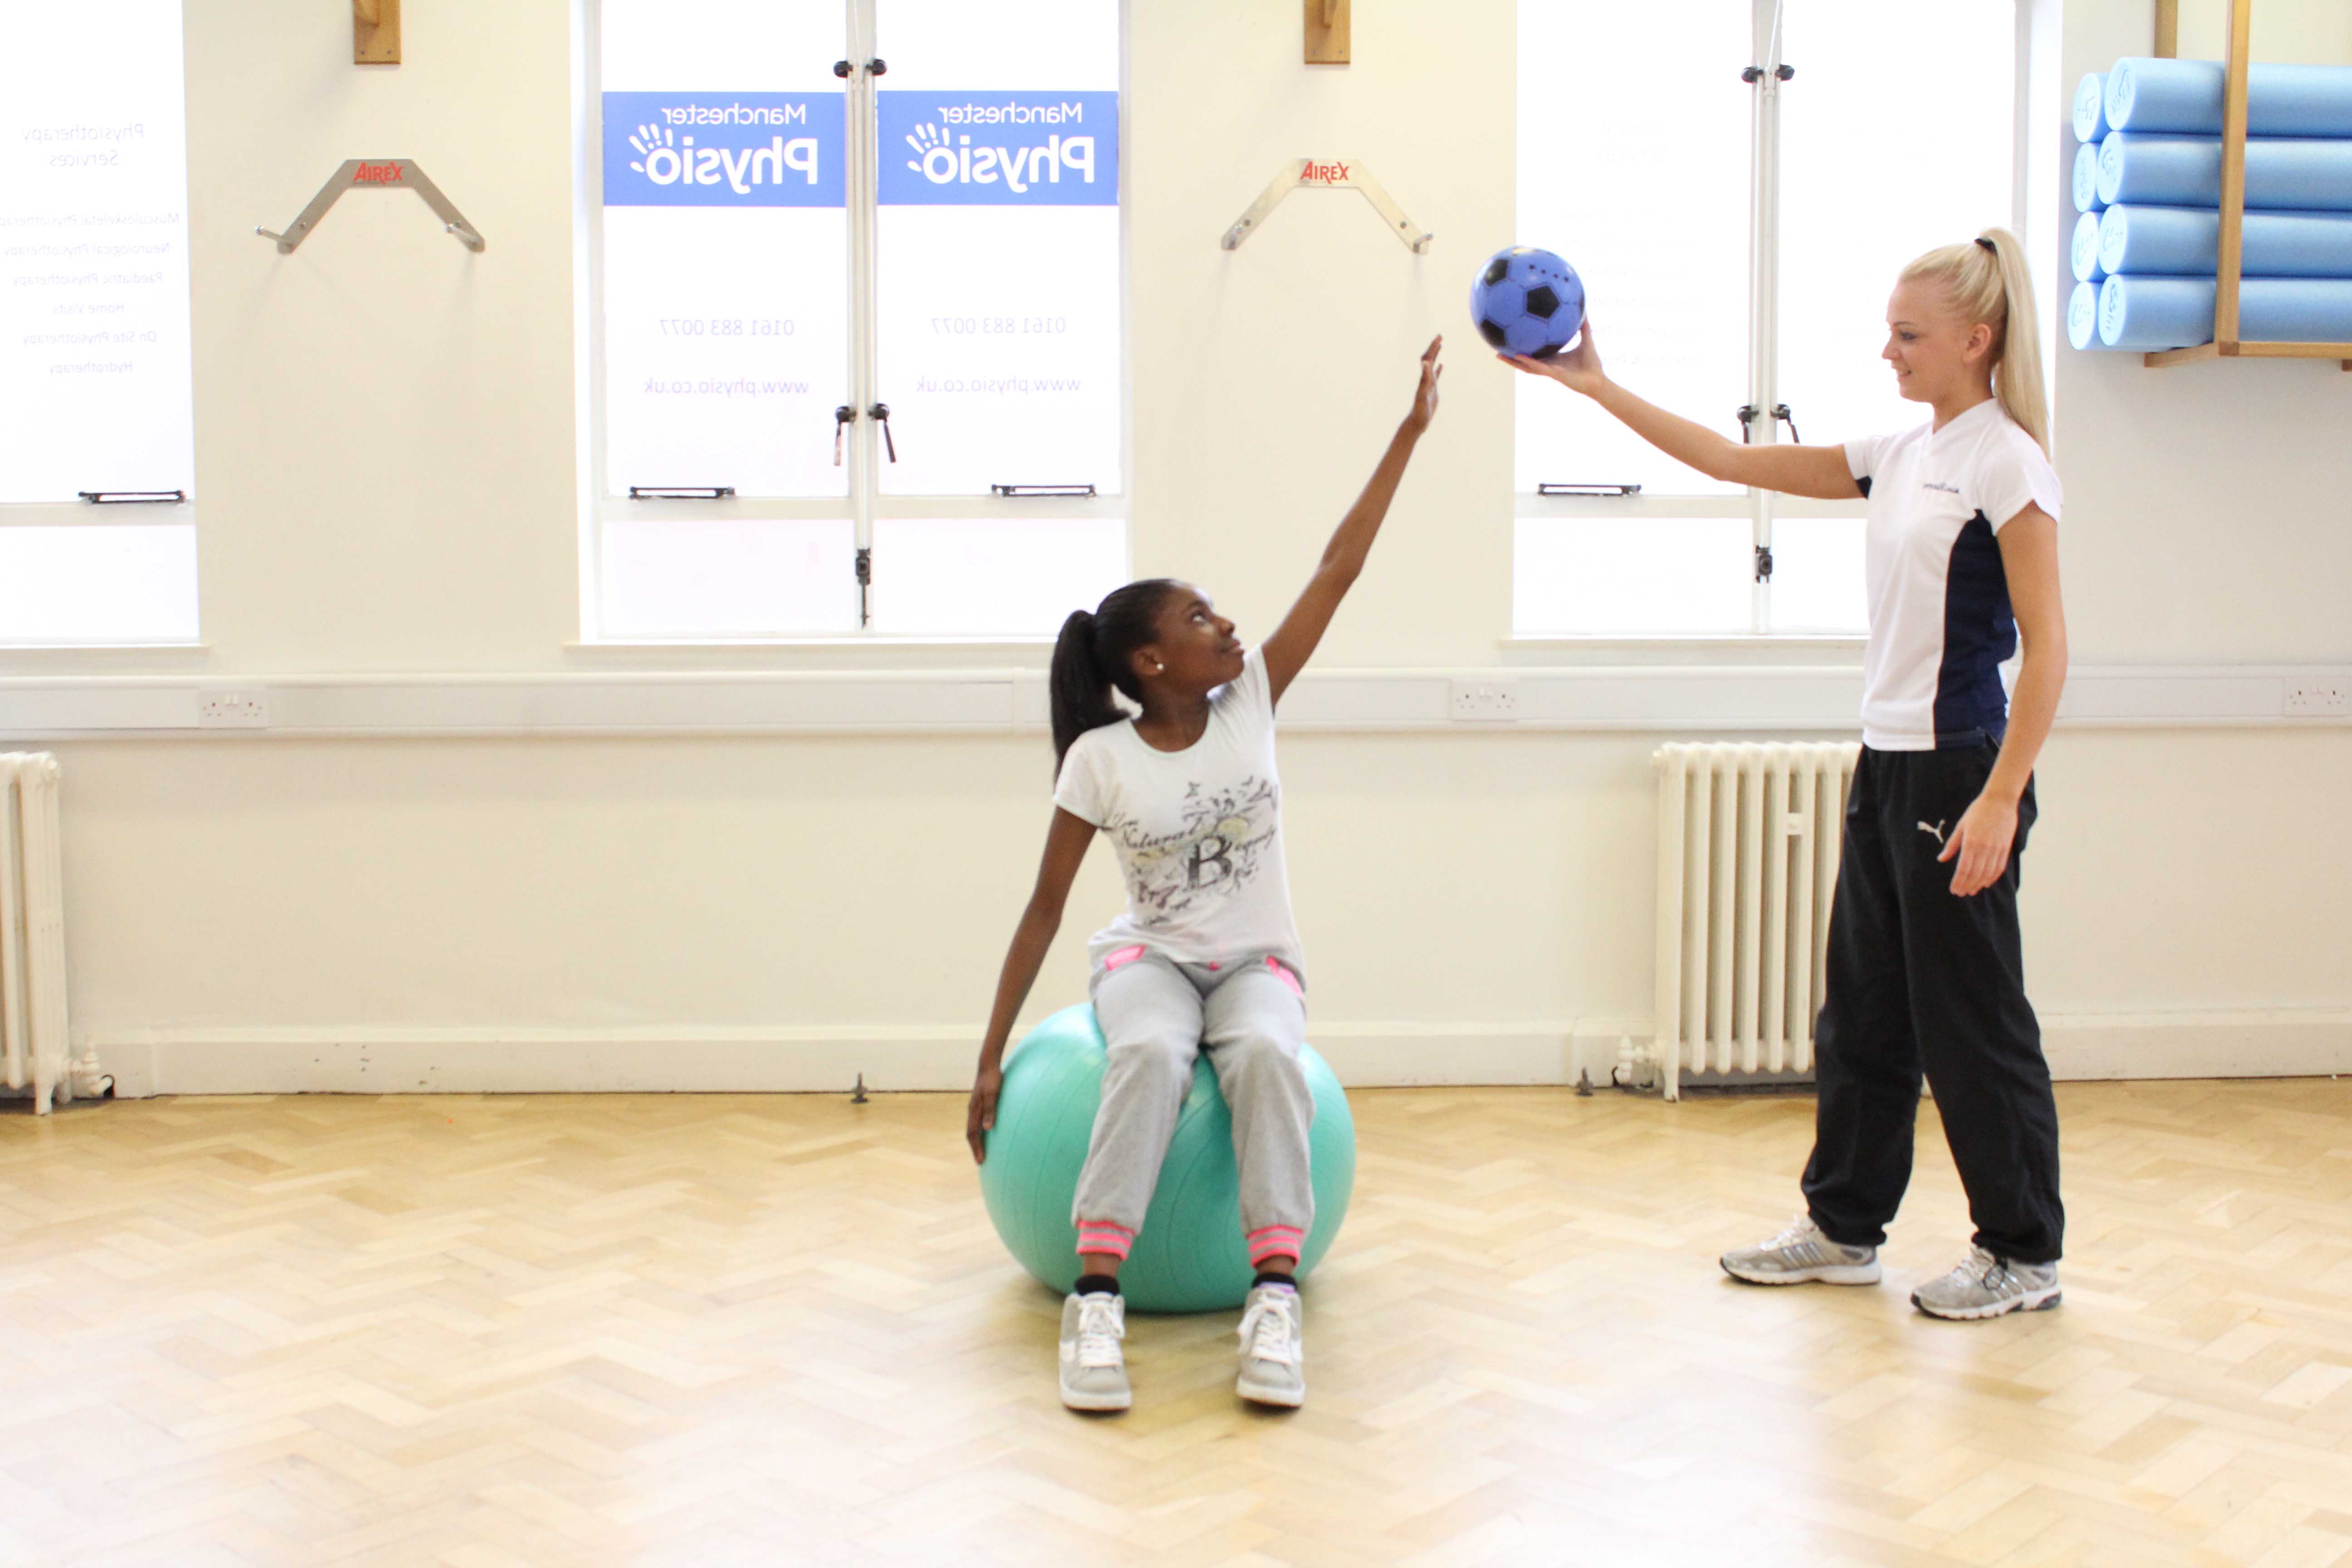 Rehabilitation through play, incorporating dynamic strength and stretching exercises.